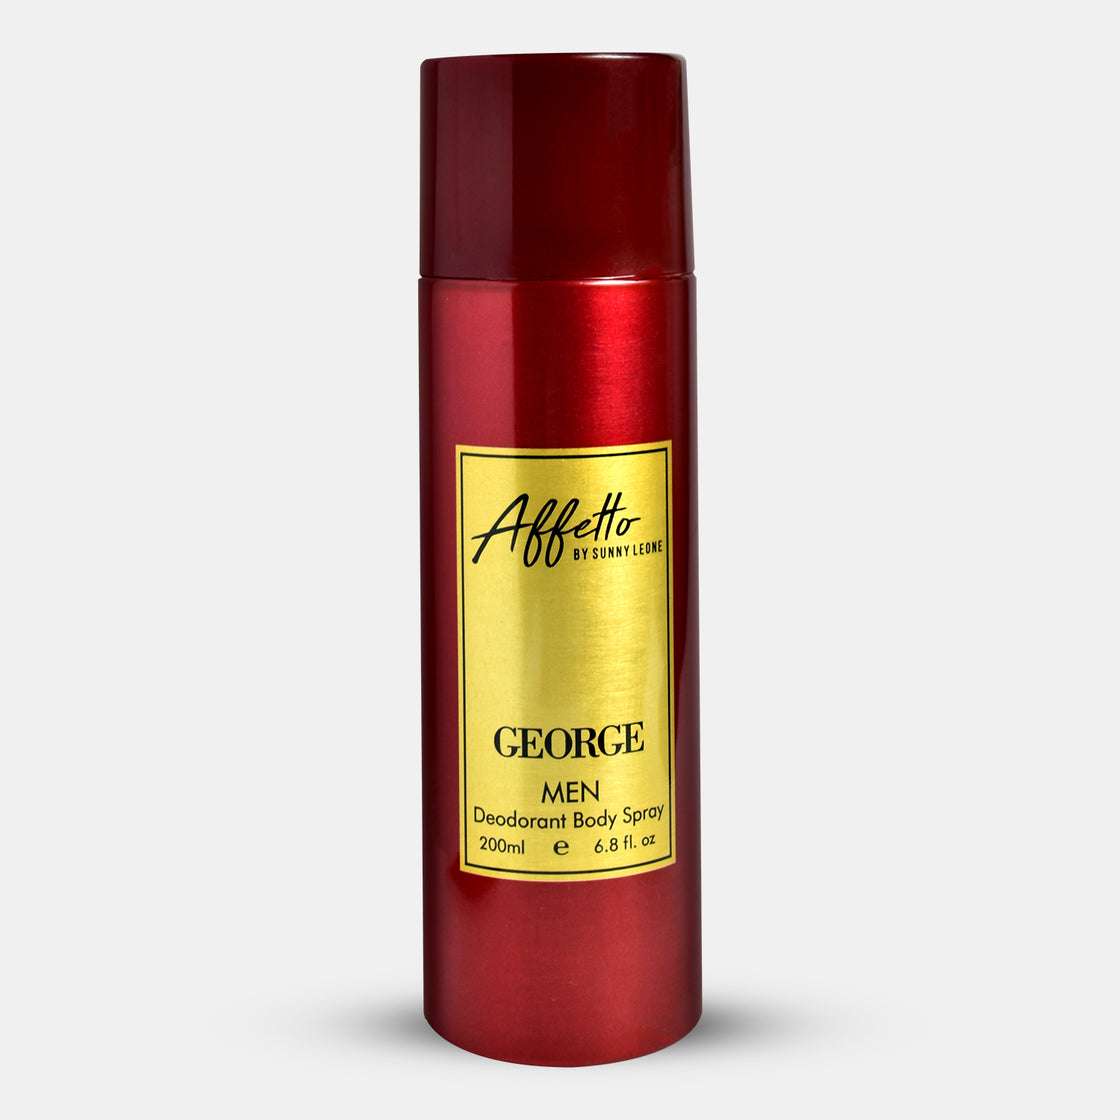 GEORGE- FOR HIM AFFETTO BY SUNNY LEONE -200ML